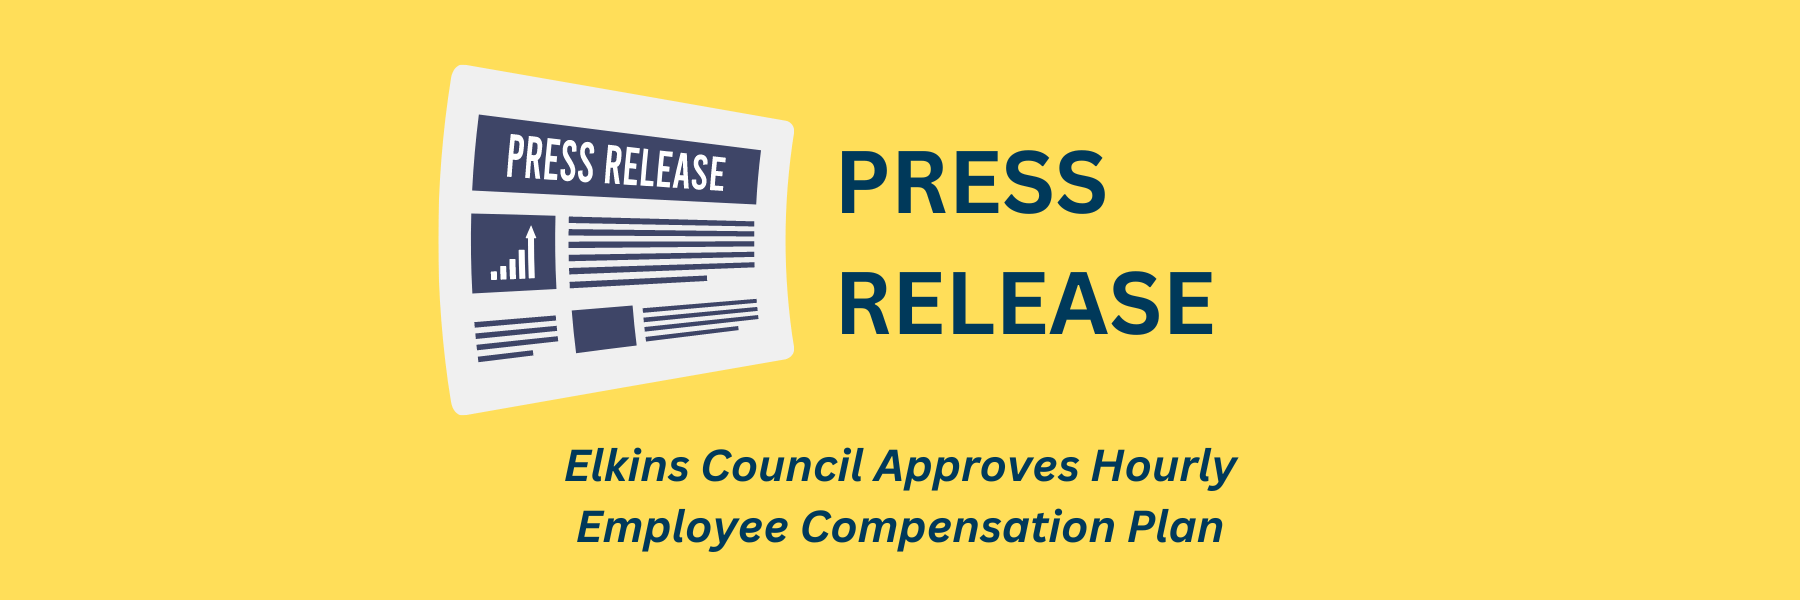 Elkins Council Approves Hourly Employee Compensation Plan